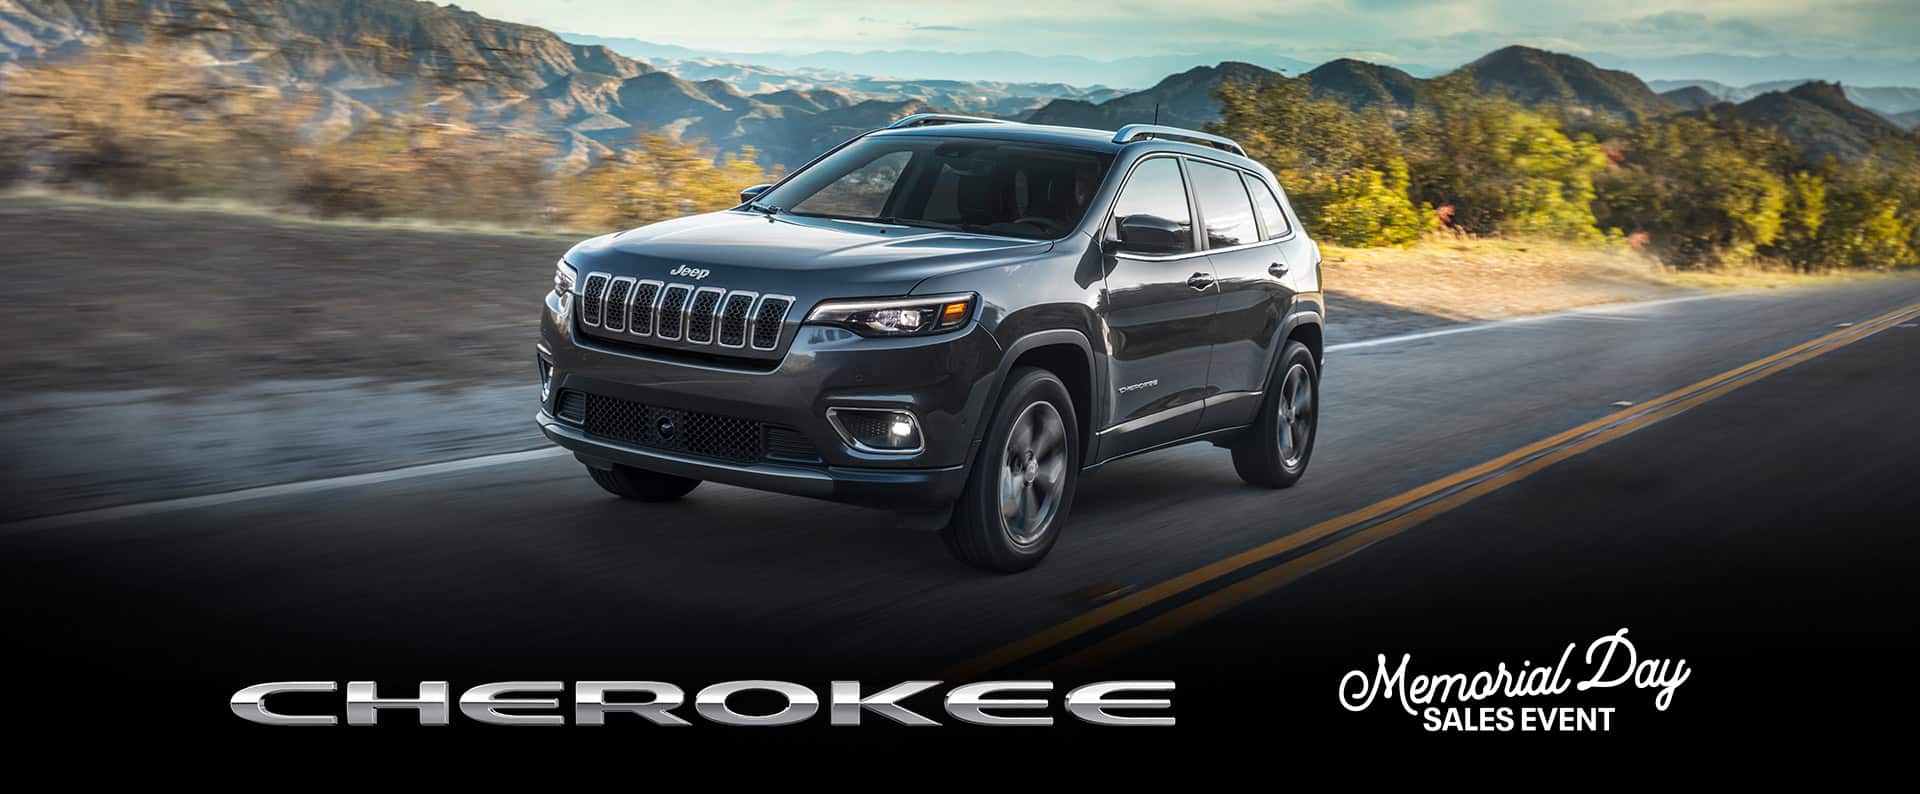 The 2022 Jeep Cherokee Limited being driven on an open road with mountains in the distance. The Memorial Day Sales Event logo.